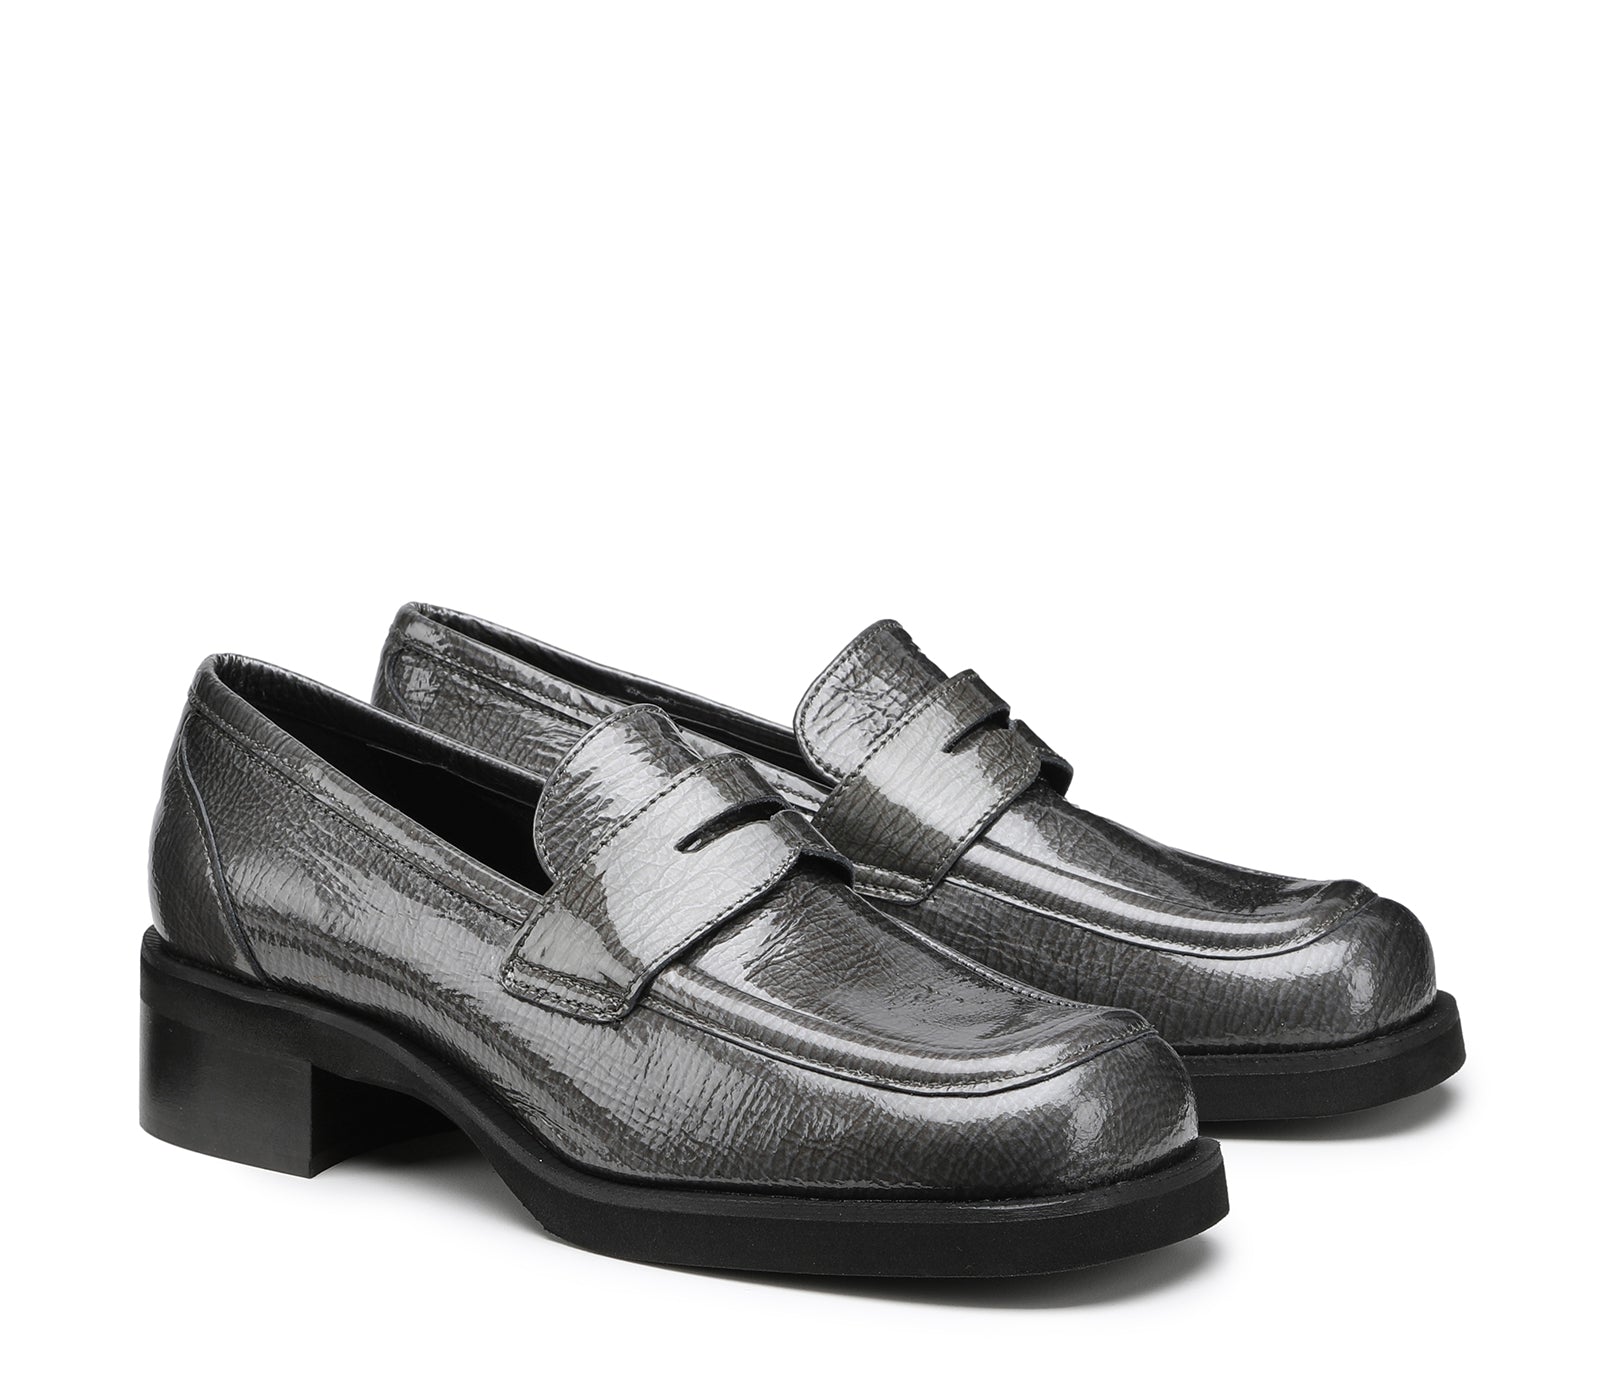 Women's Moccasins in Gray Patent Leather with Square Toe and Rubber Sole